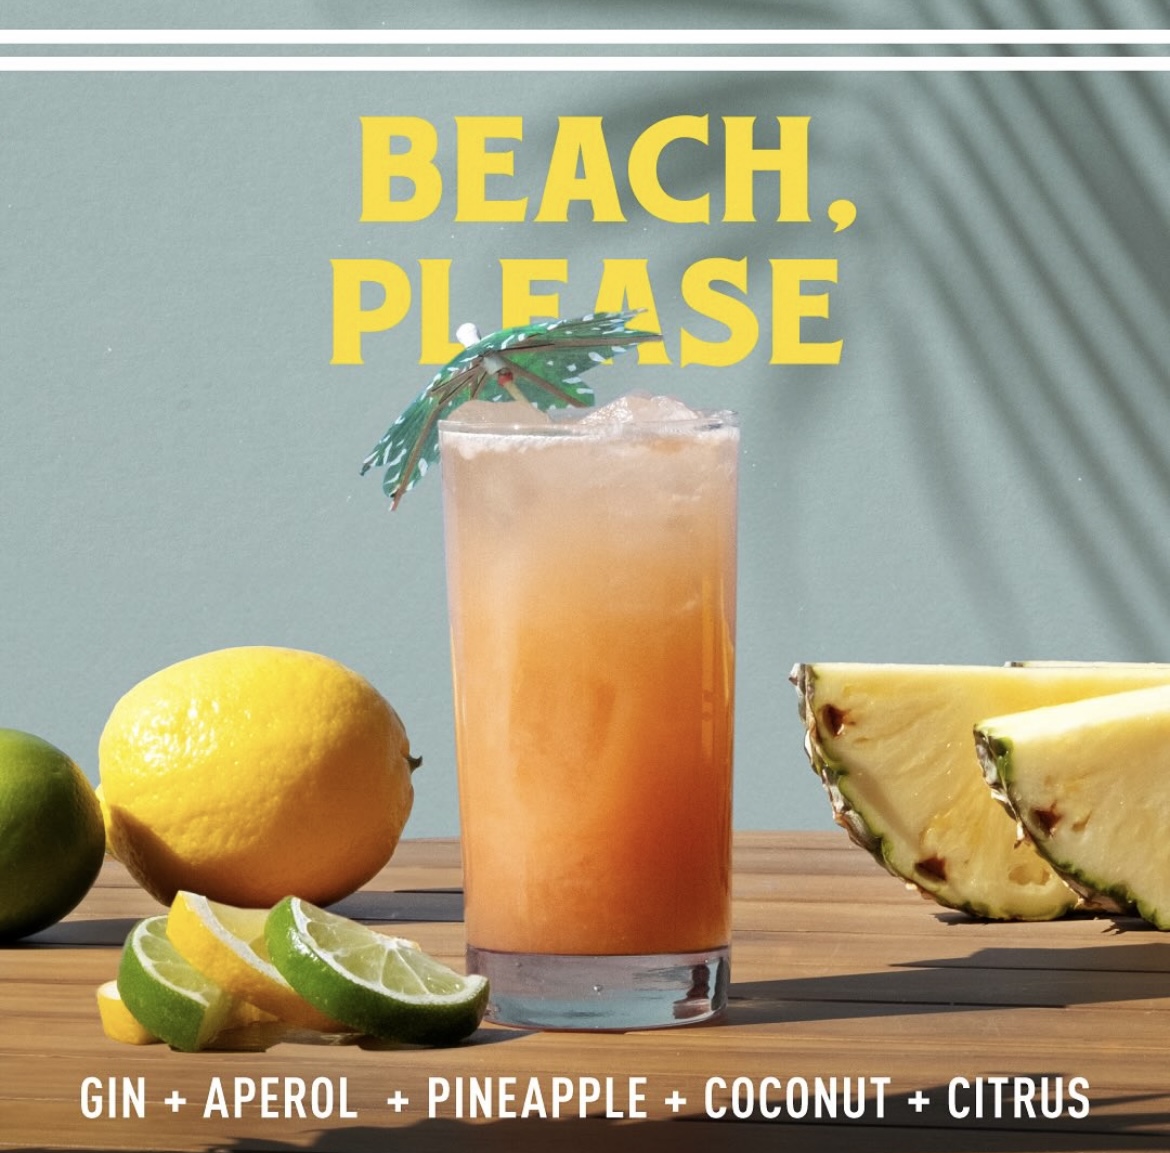 A photo of the Beach, Please cocktail in a tall glass with a paper umbrella in it. The glass is surrounded by pineapple, lemon, and lime.